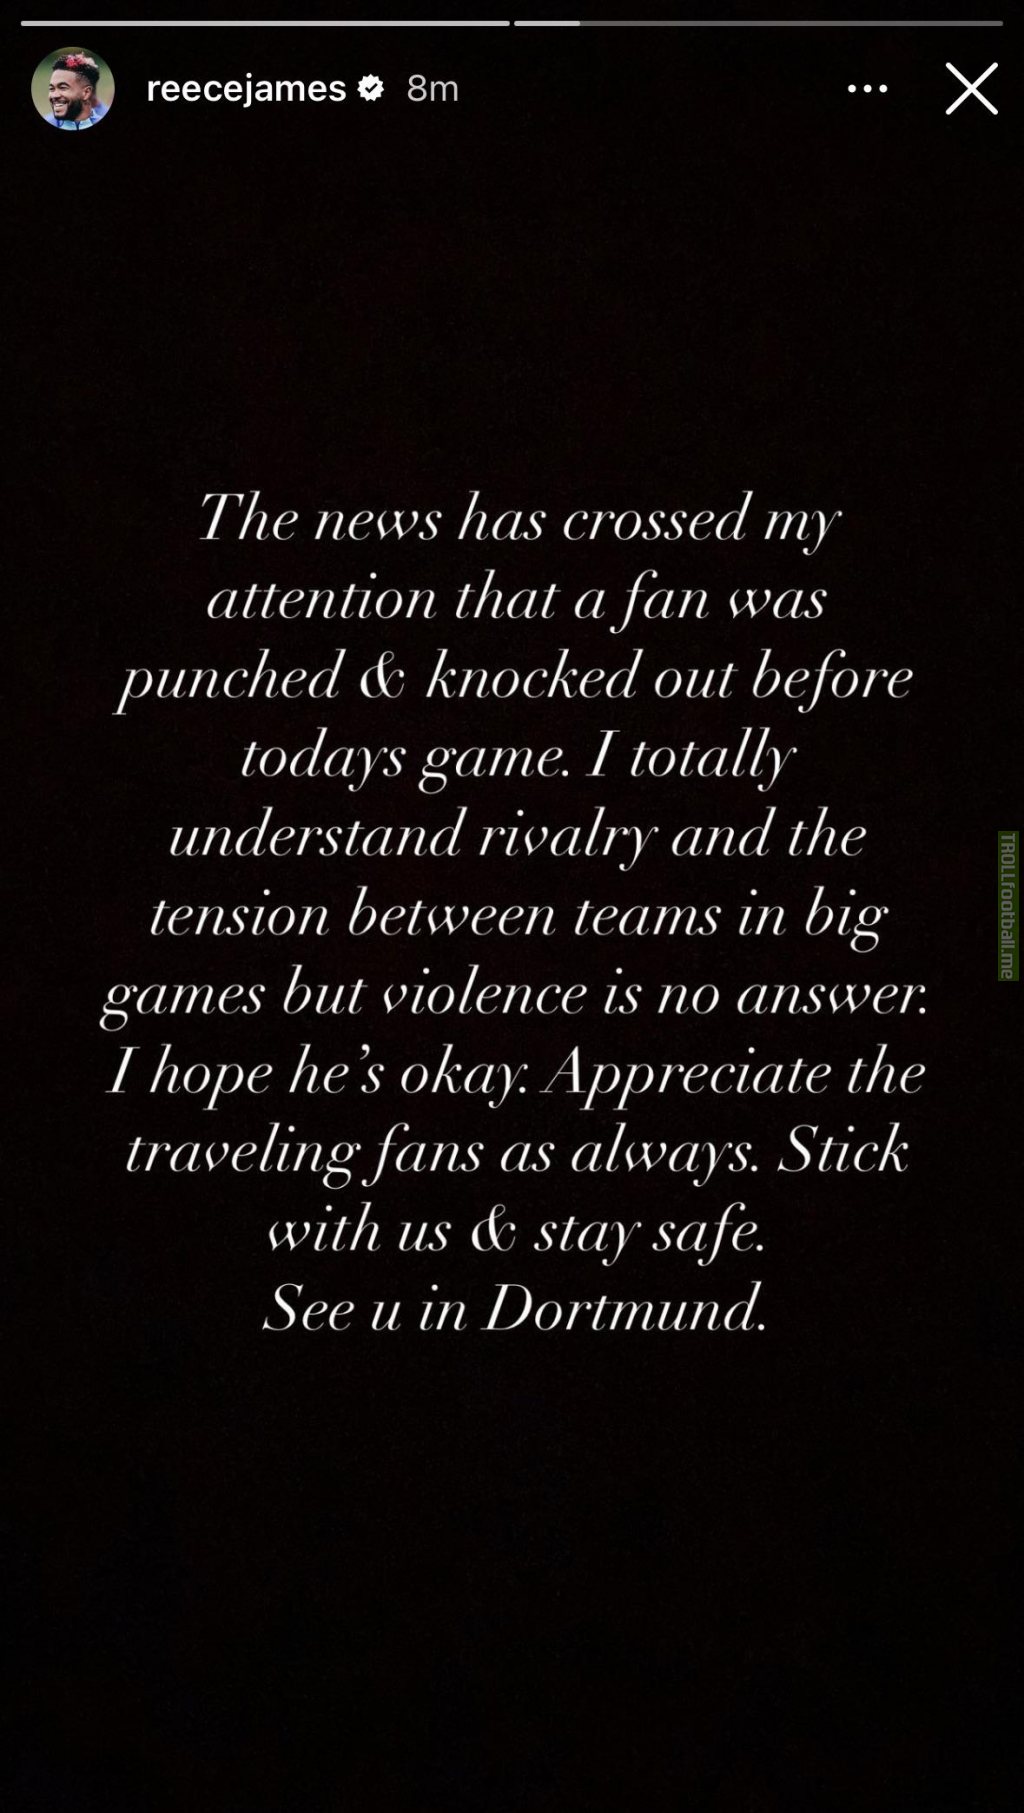 [ReeceJames]The news has crossed my attention that a fan was punched&knocked out before todays game.I totally understand rivalry and the tension between teams in big games but violence is no answer.I hope he’s okay:Appreciate the traveling fans as always.Stick with us de stay safe.See u in Dortmund.